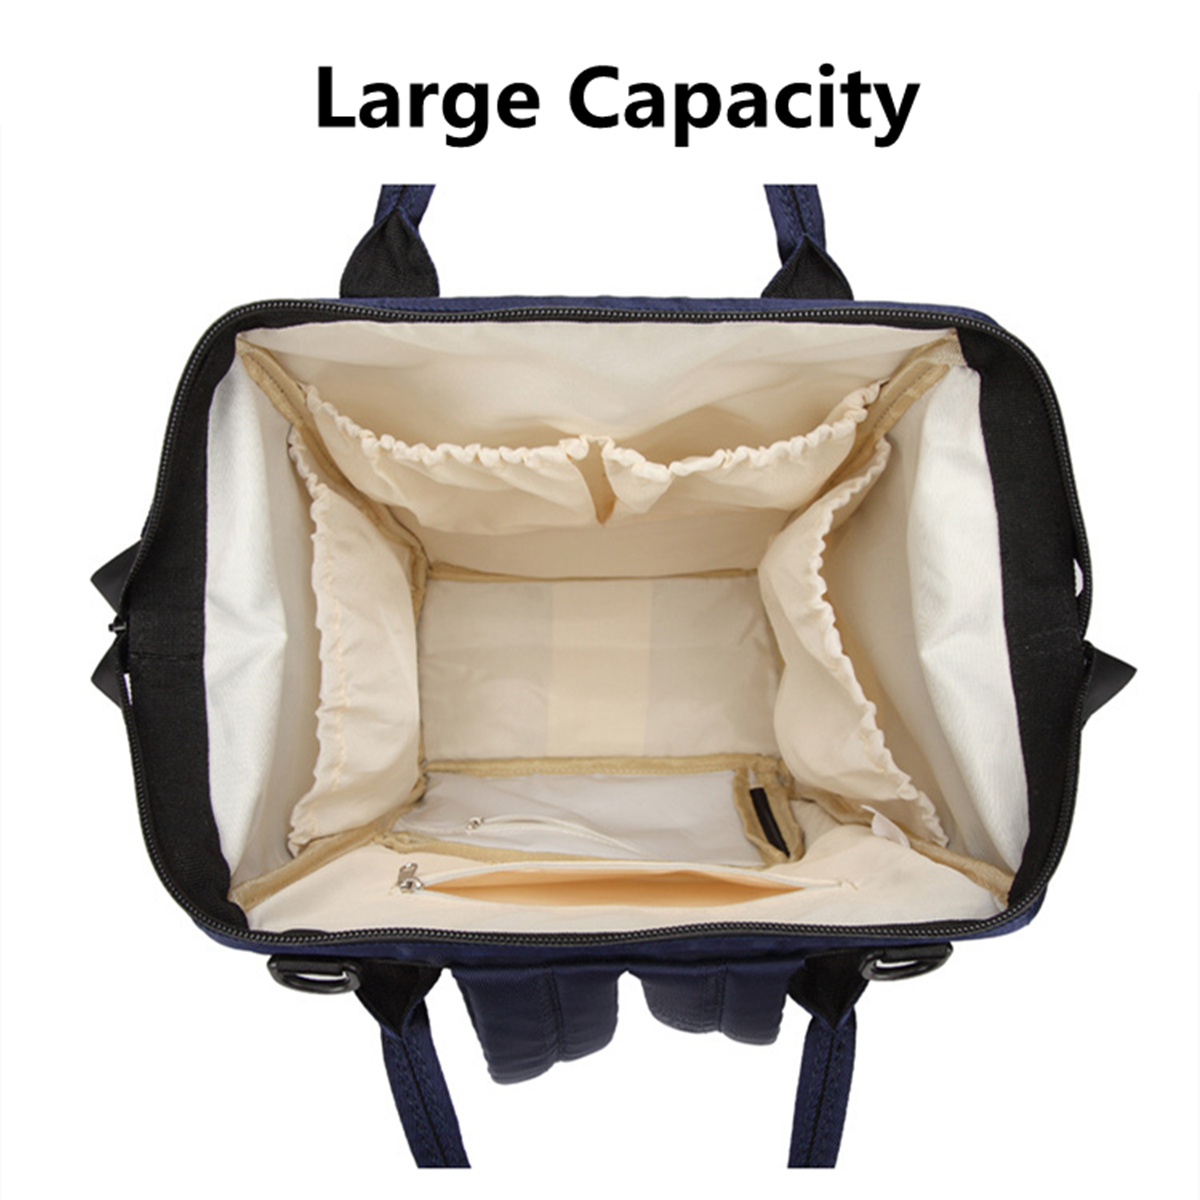 16L-Outdoor-Travel-Mummy-Backpack-Rucksack-Large-Capacity-Baby-Nappy-Diapers-Storage-Bag-1414600-9